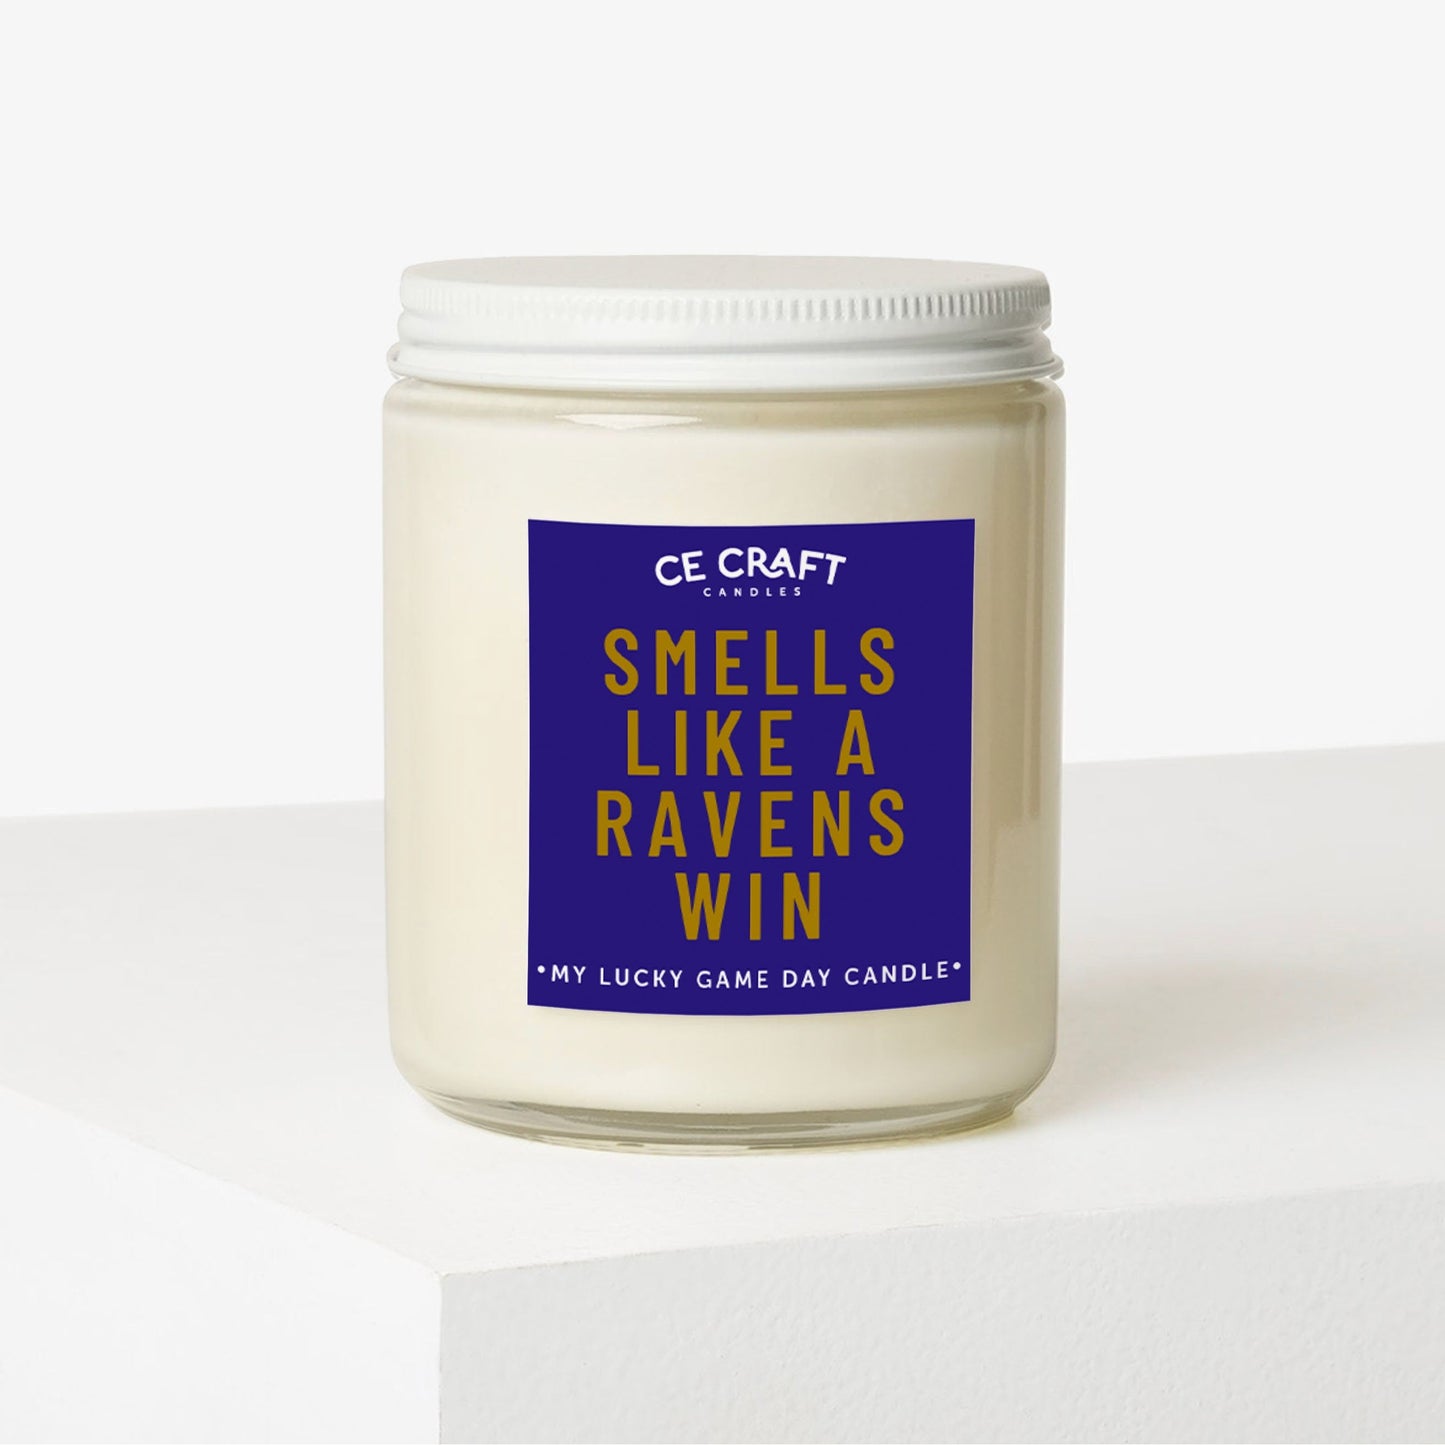 Smells Like a Ravens Win Scented Candle C & E Craft Co 